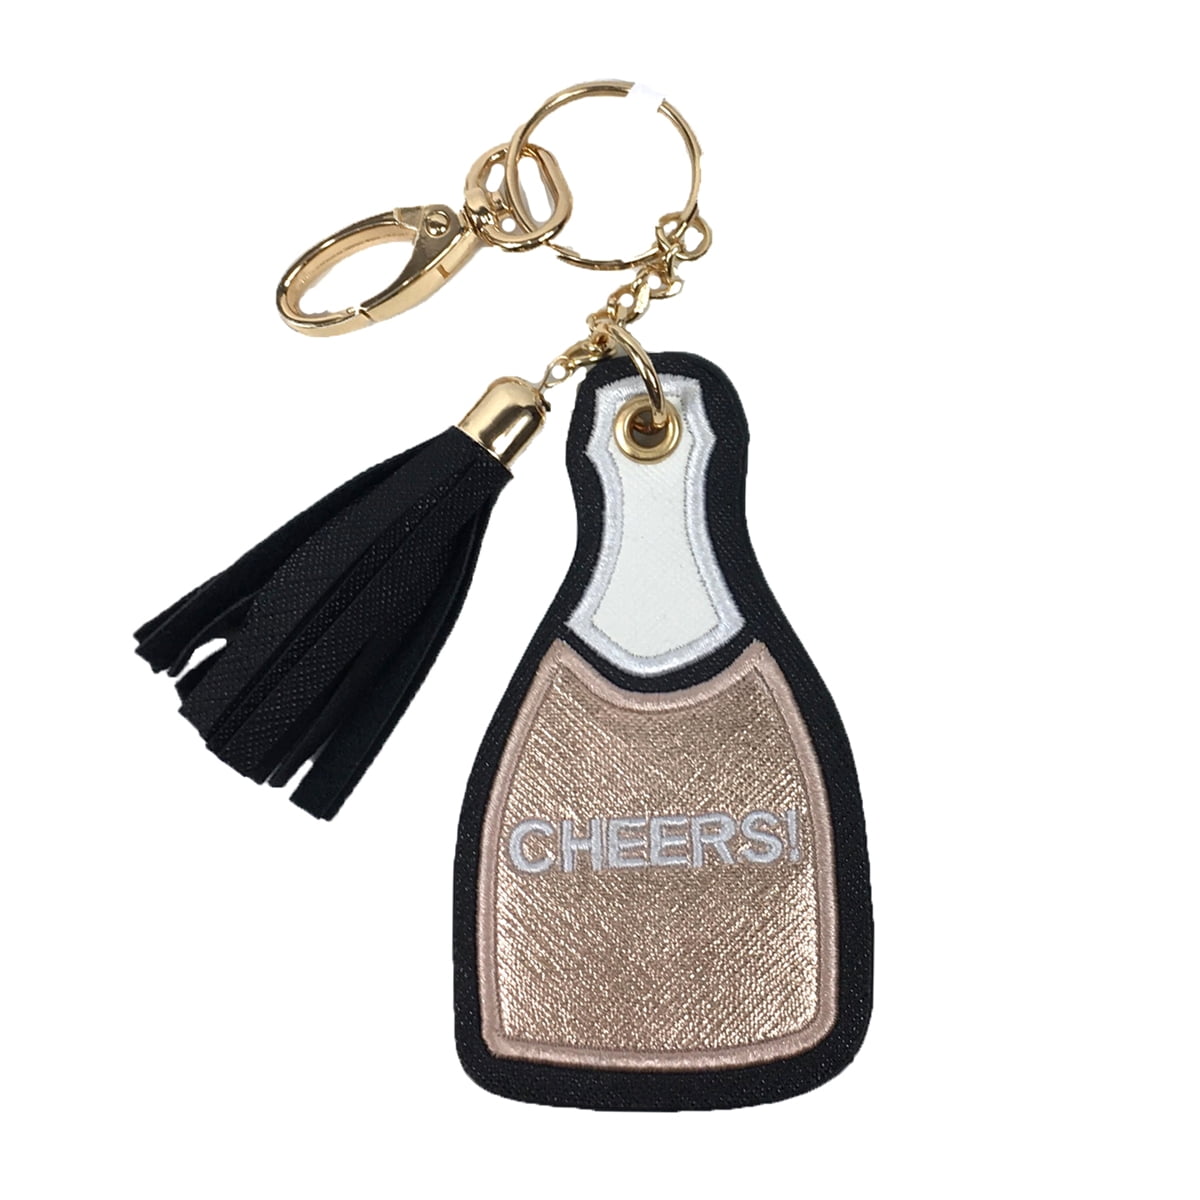 Under One Sky Cheers! Champagne Bottle Key Chain Purse Charm, Rose